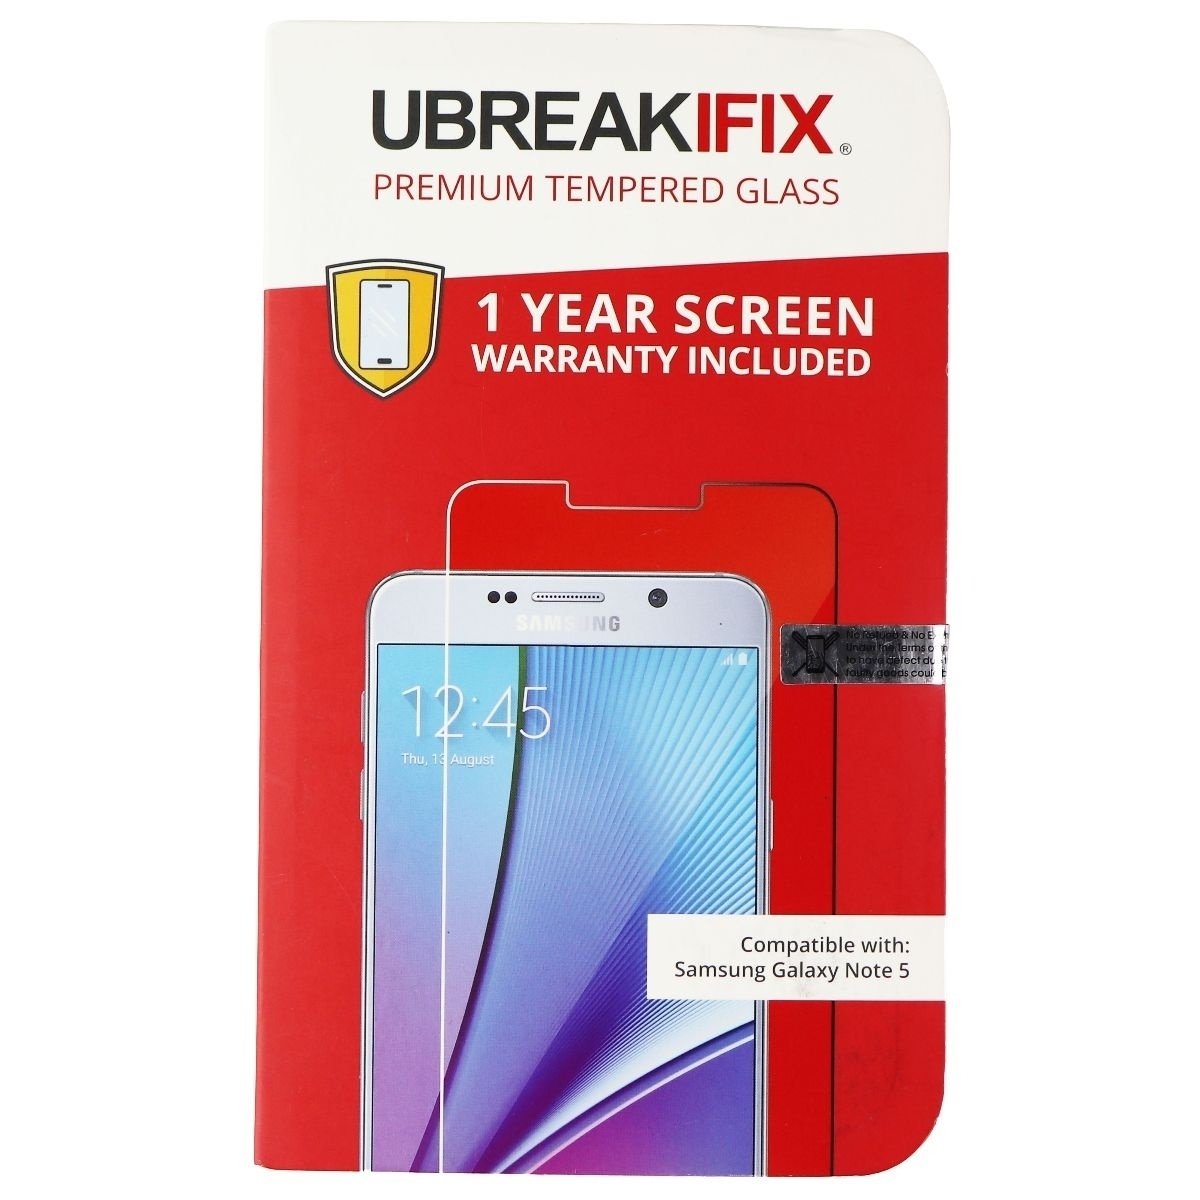 UBREAKIFIX Premium Tempered Glass For Samsung Galaxy Note5 - Clear